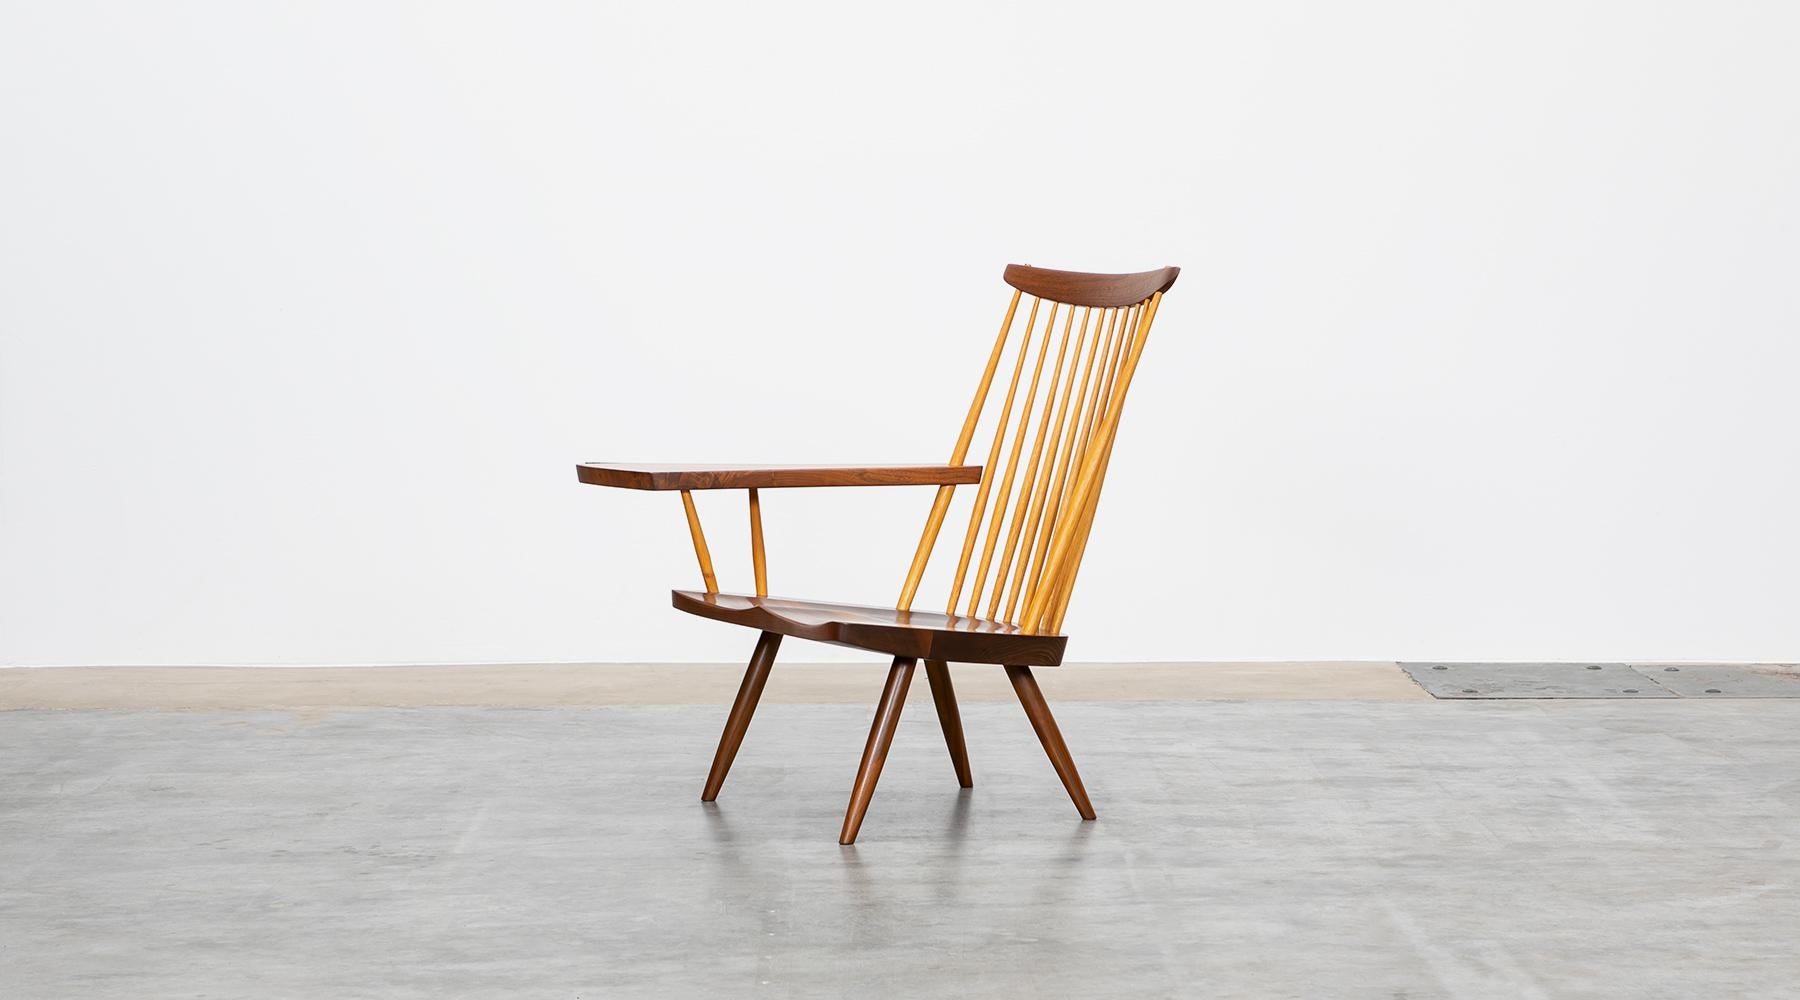 Armchair in walnut designed by George Nakashima, USA, 1999.

This handcrafted armchair by George Nakashima has a beautifully figured American walnut armrest with an organic and subtle freeform edge. Manufactured by Nakashima Studios in